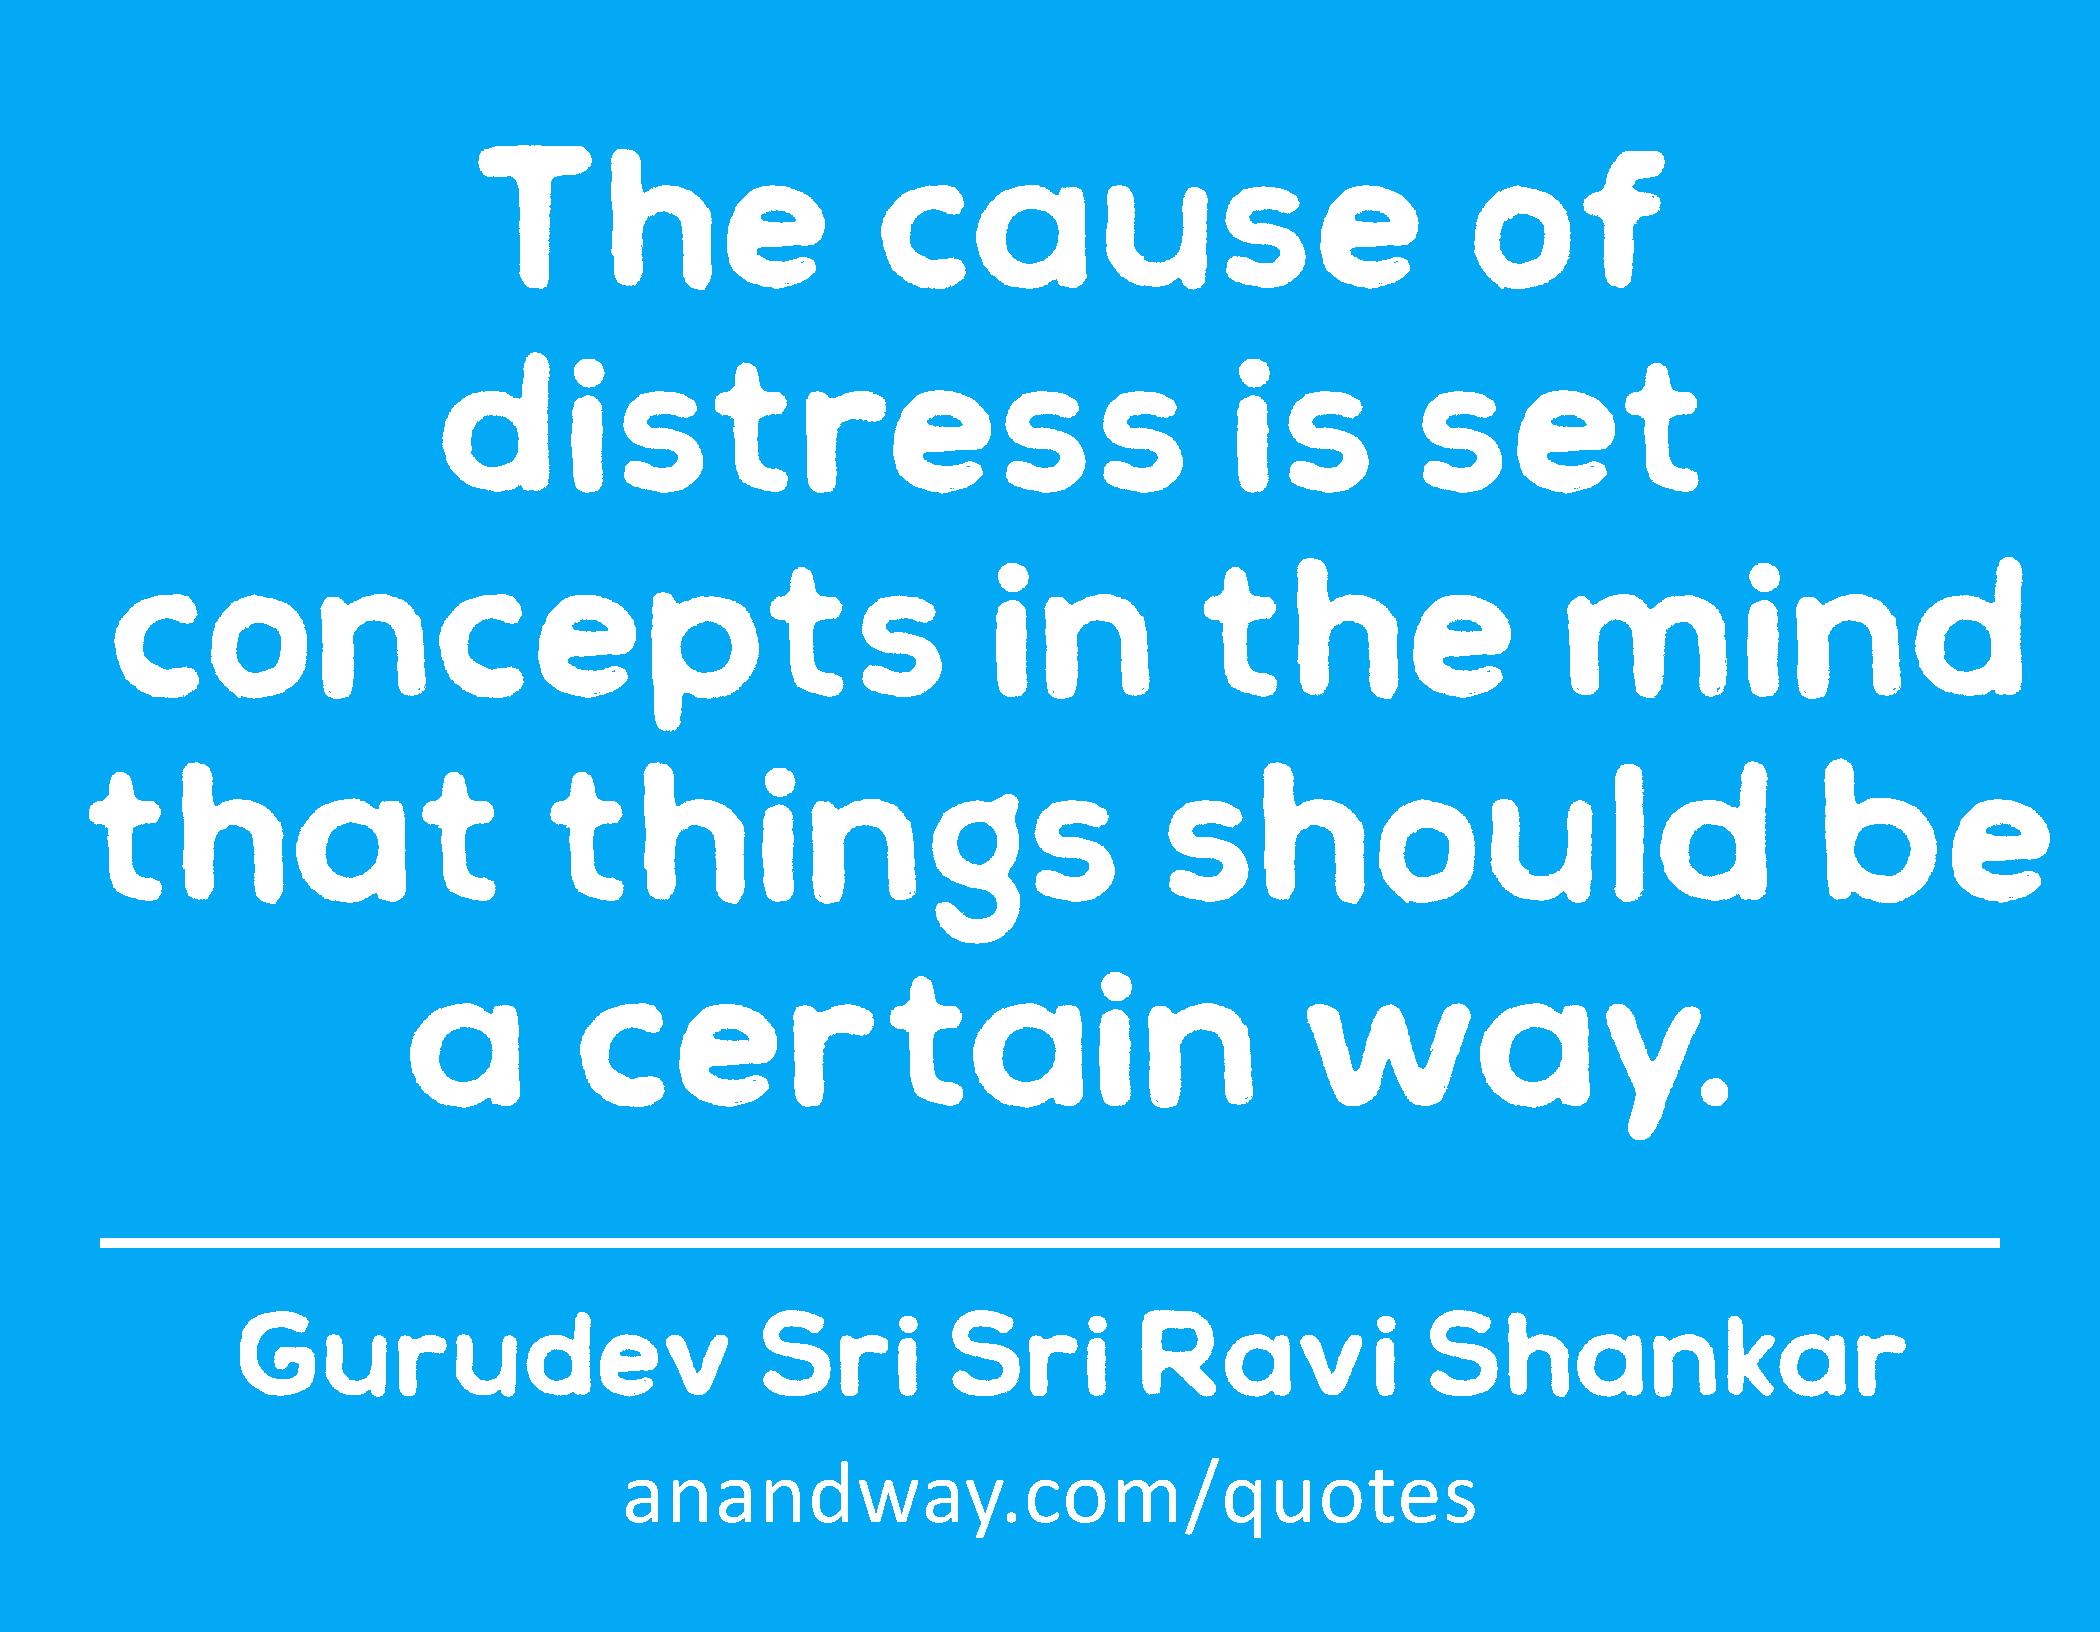 The cause of distress is set concepts in the mind that things should be a certain way. 
 -Gurudev Sri Sri Ravi Shankar